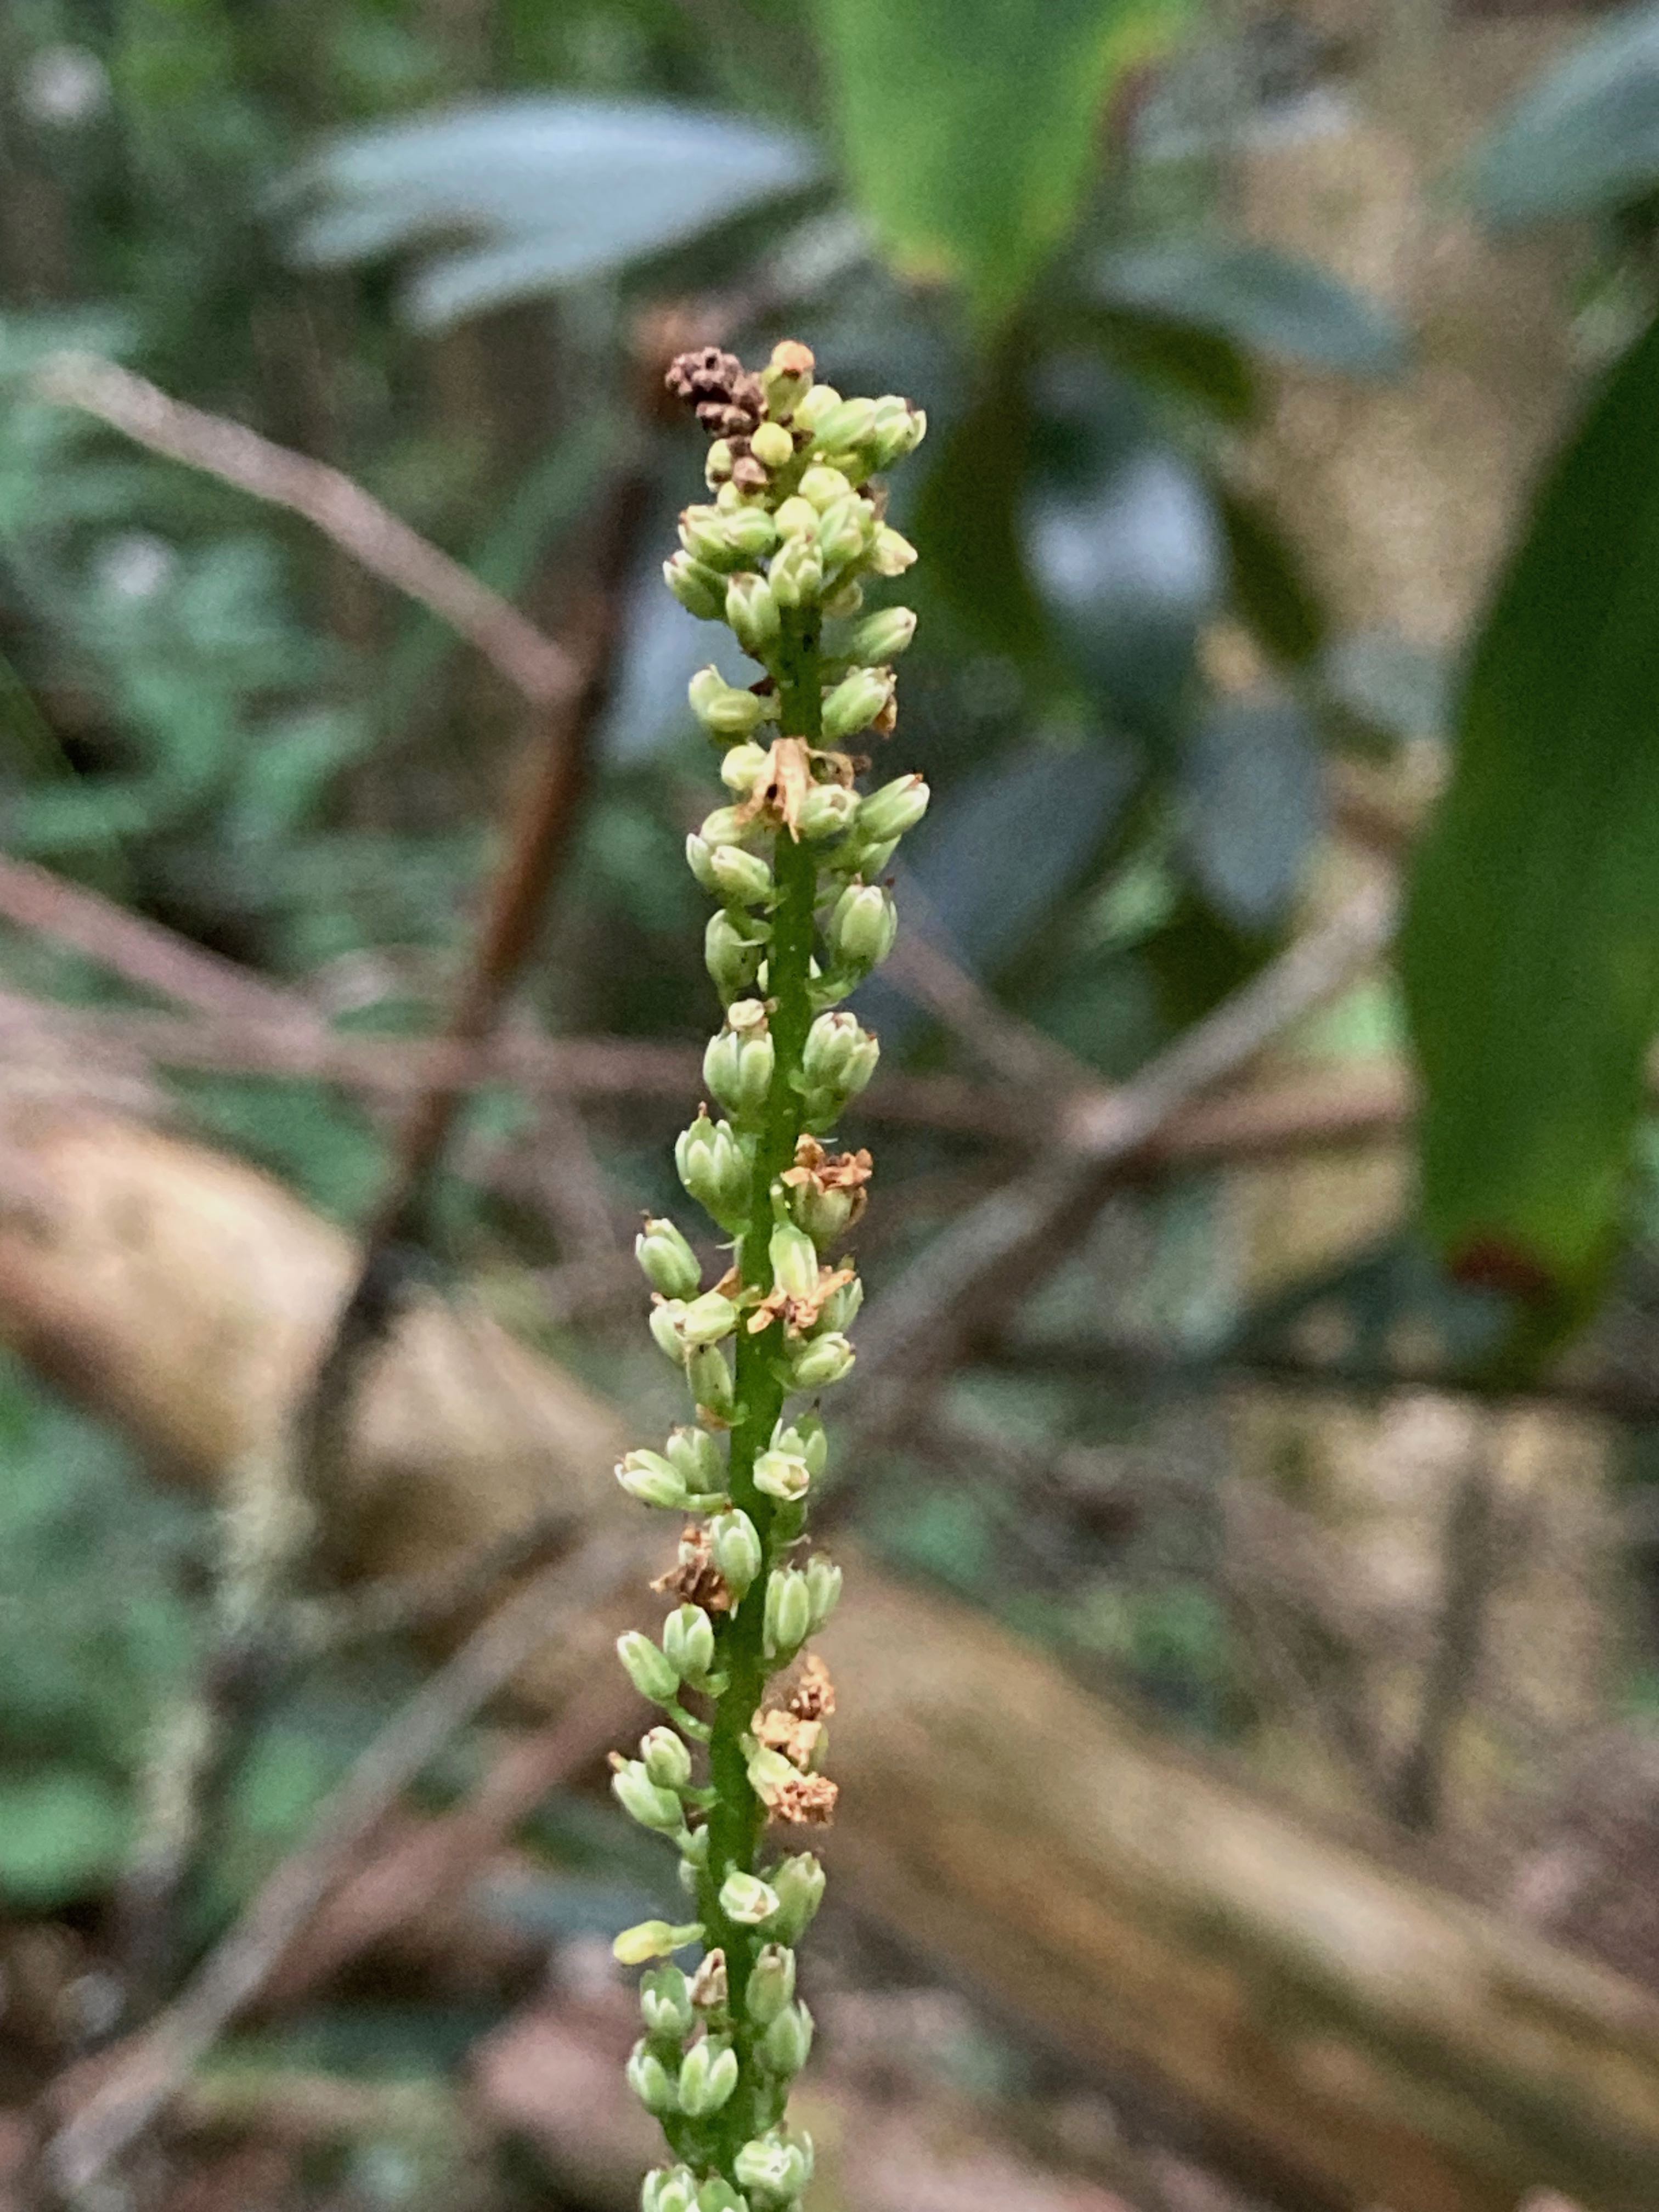 The Scientific Name is Galax urceolata [= Galax aphylla]. You will likely hear them called Galax, Beetleweed. This picture shows the Raceme just after flowering. of Galax urceolata [= Galax aphylla]